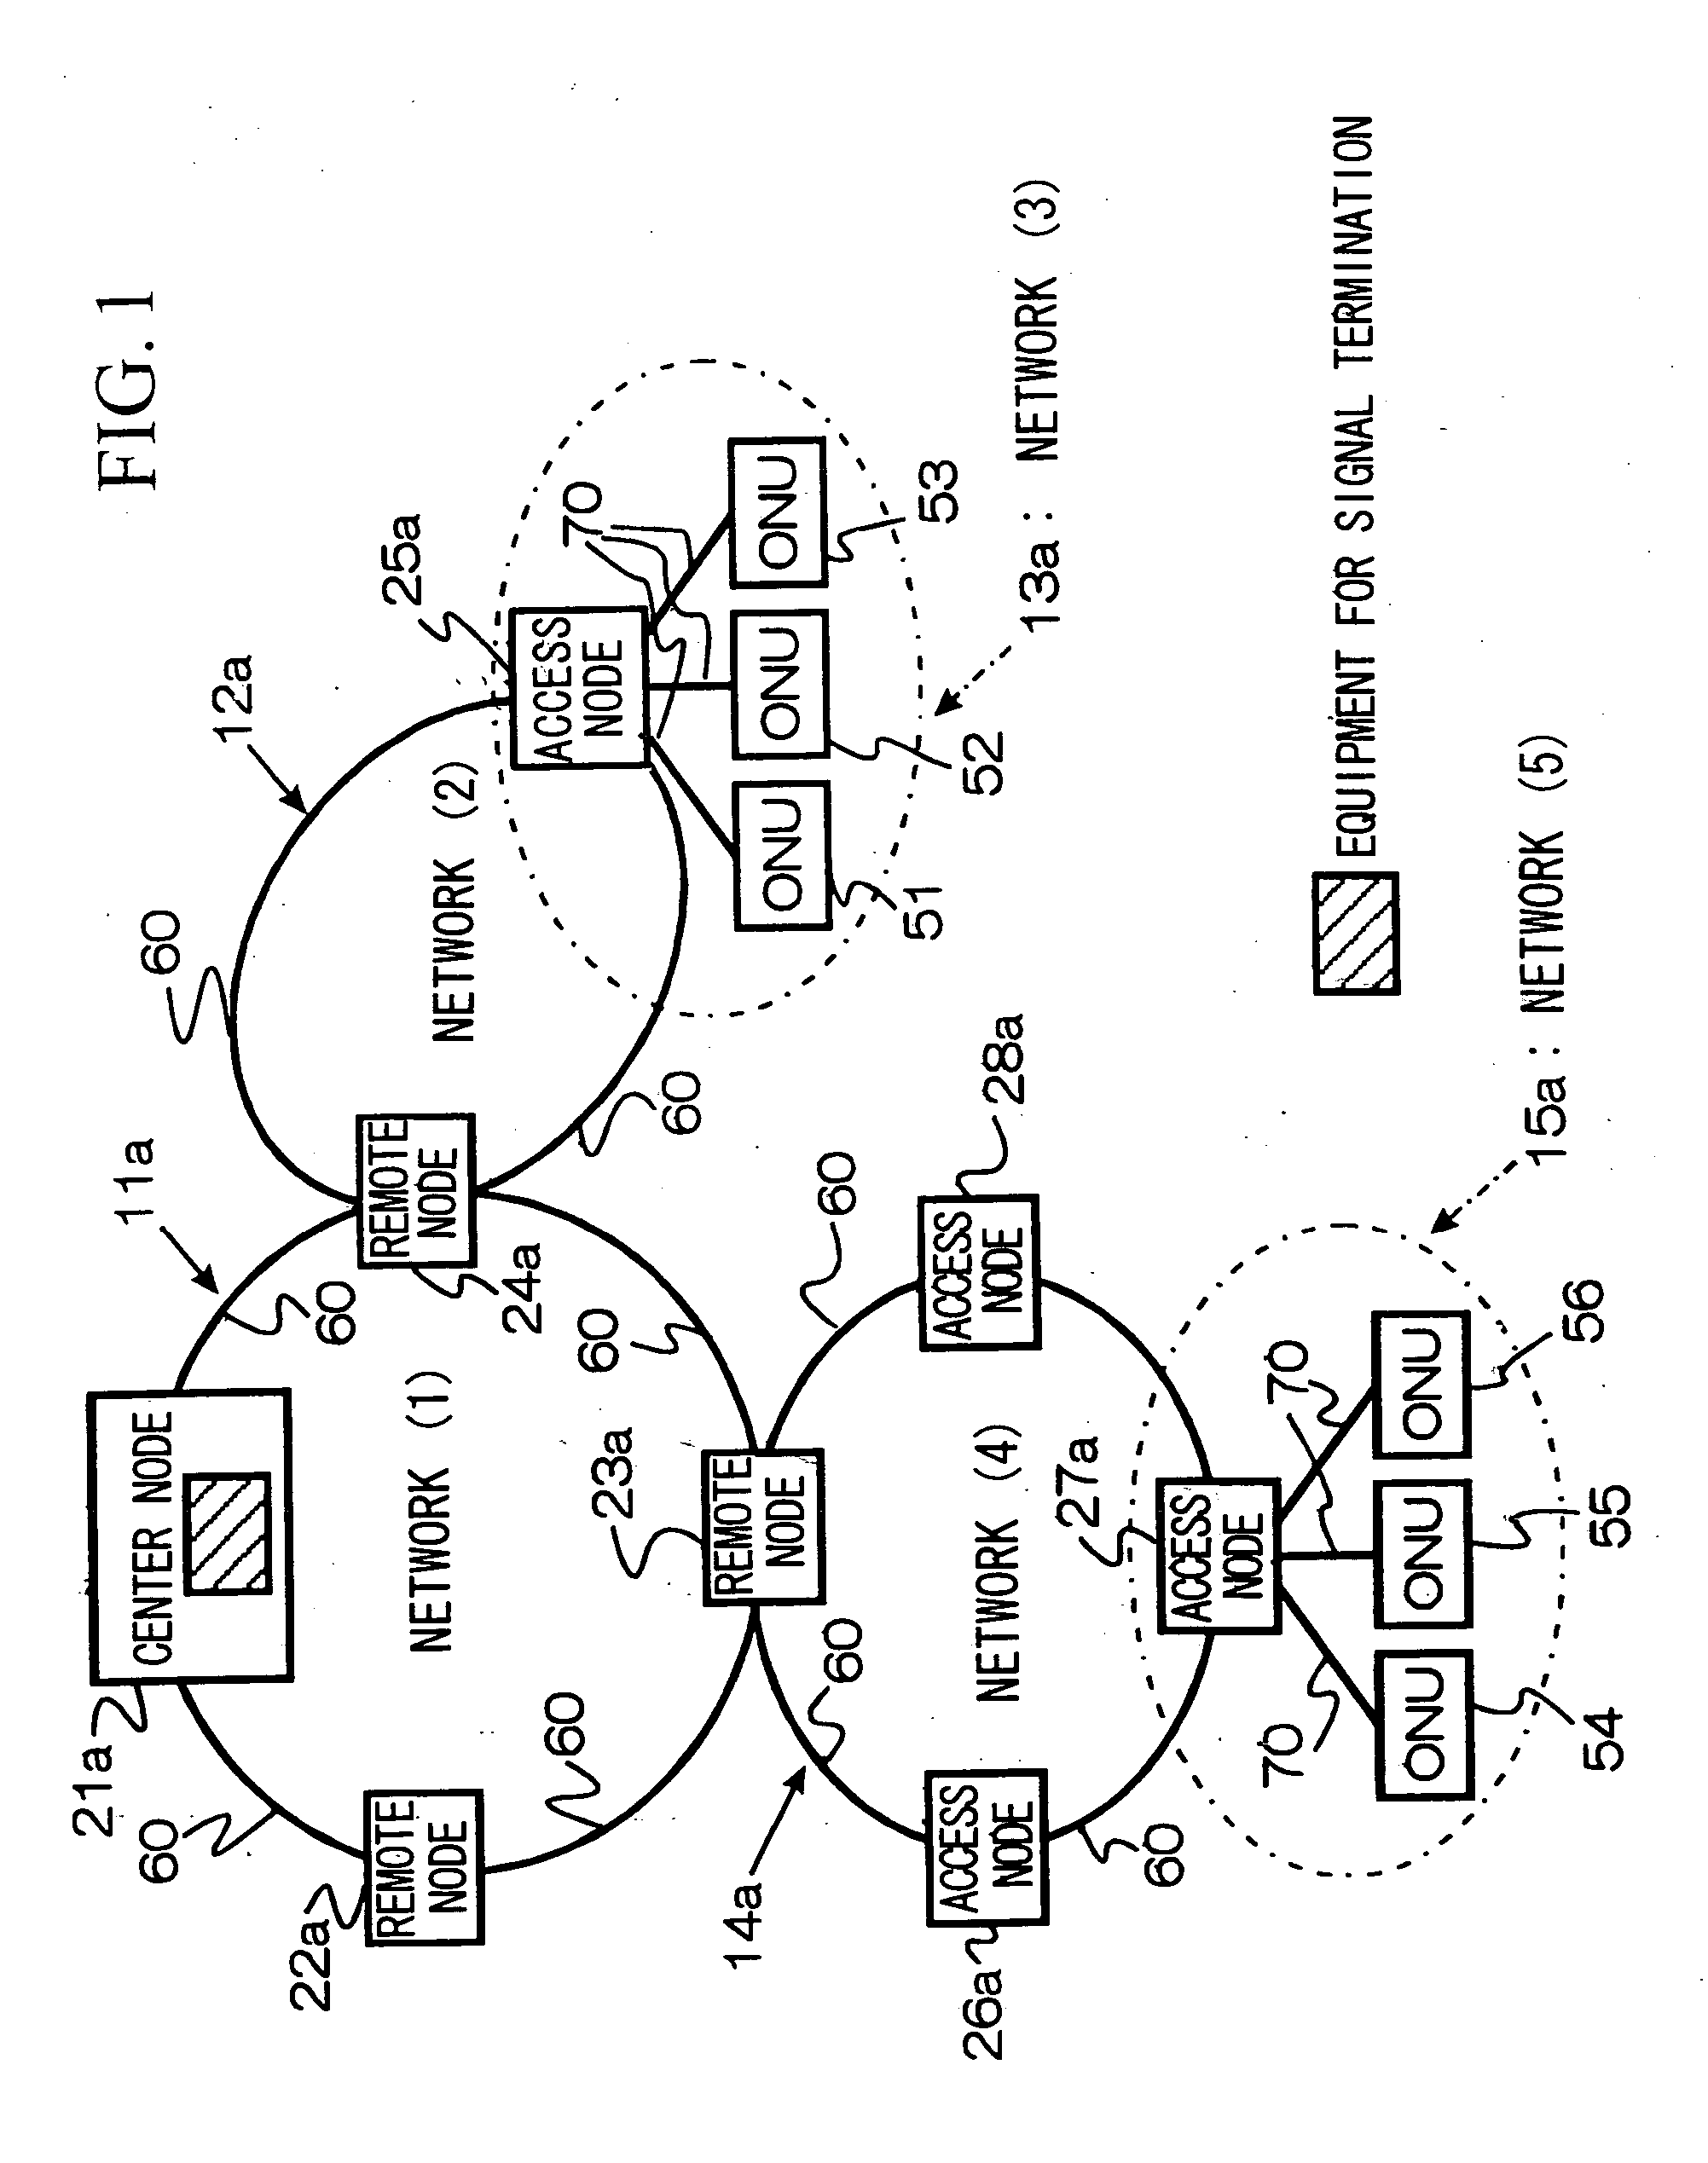 Node apparatus, optical wavelength division multiplexing network, and system switching method